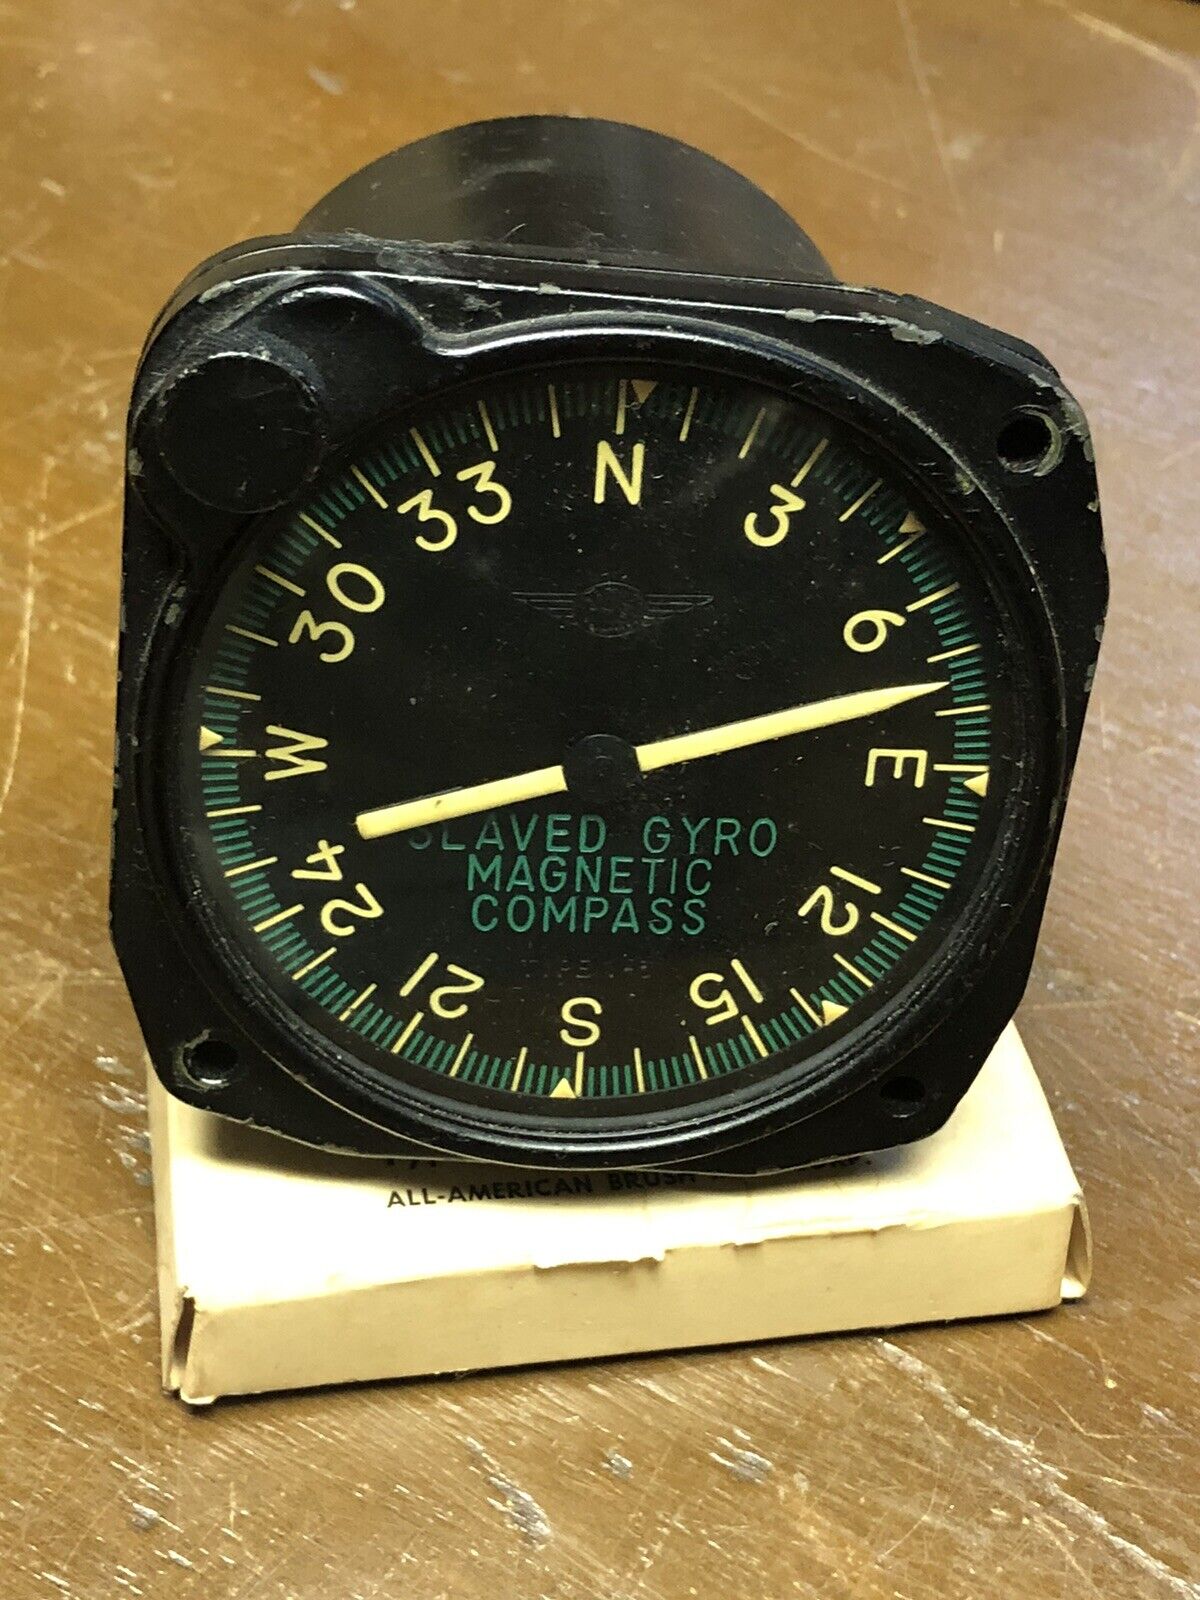 Sperry Slaved Gyro Magnetic Compass V-3 Bombing Navigational Computer Unit